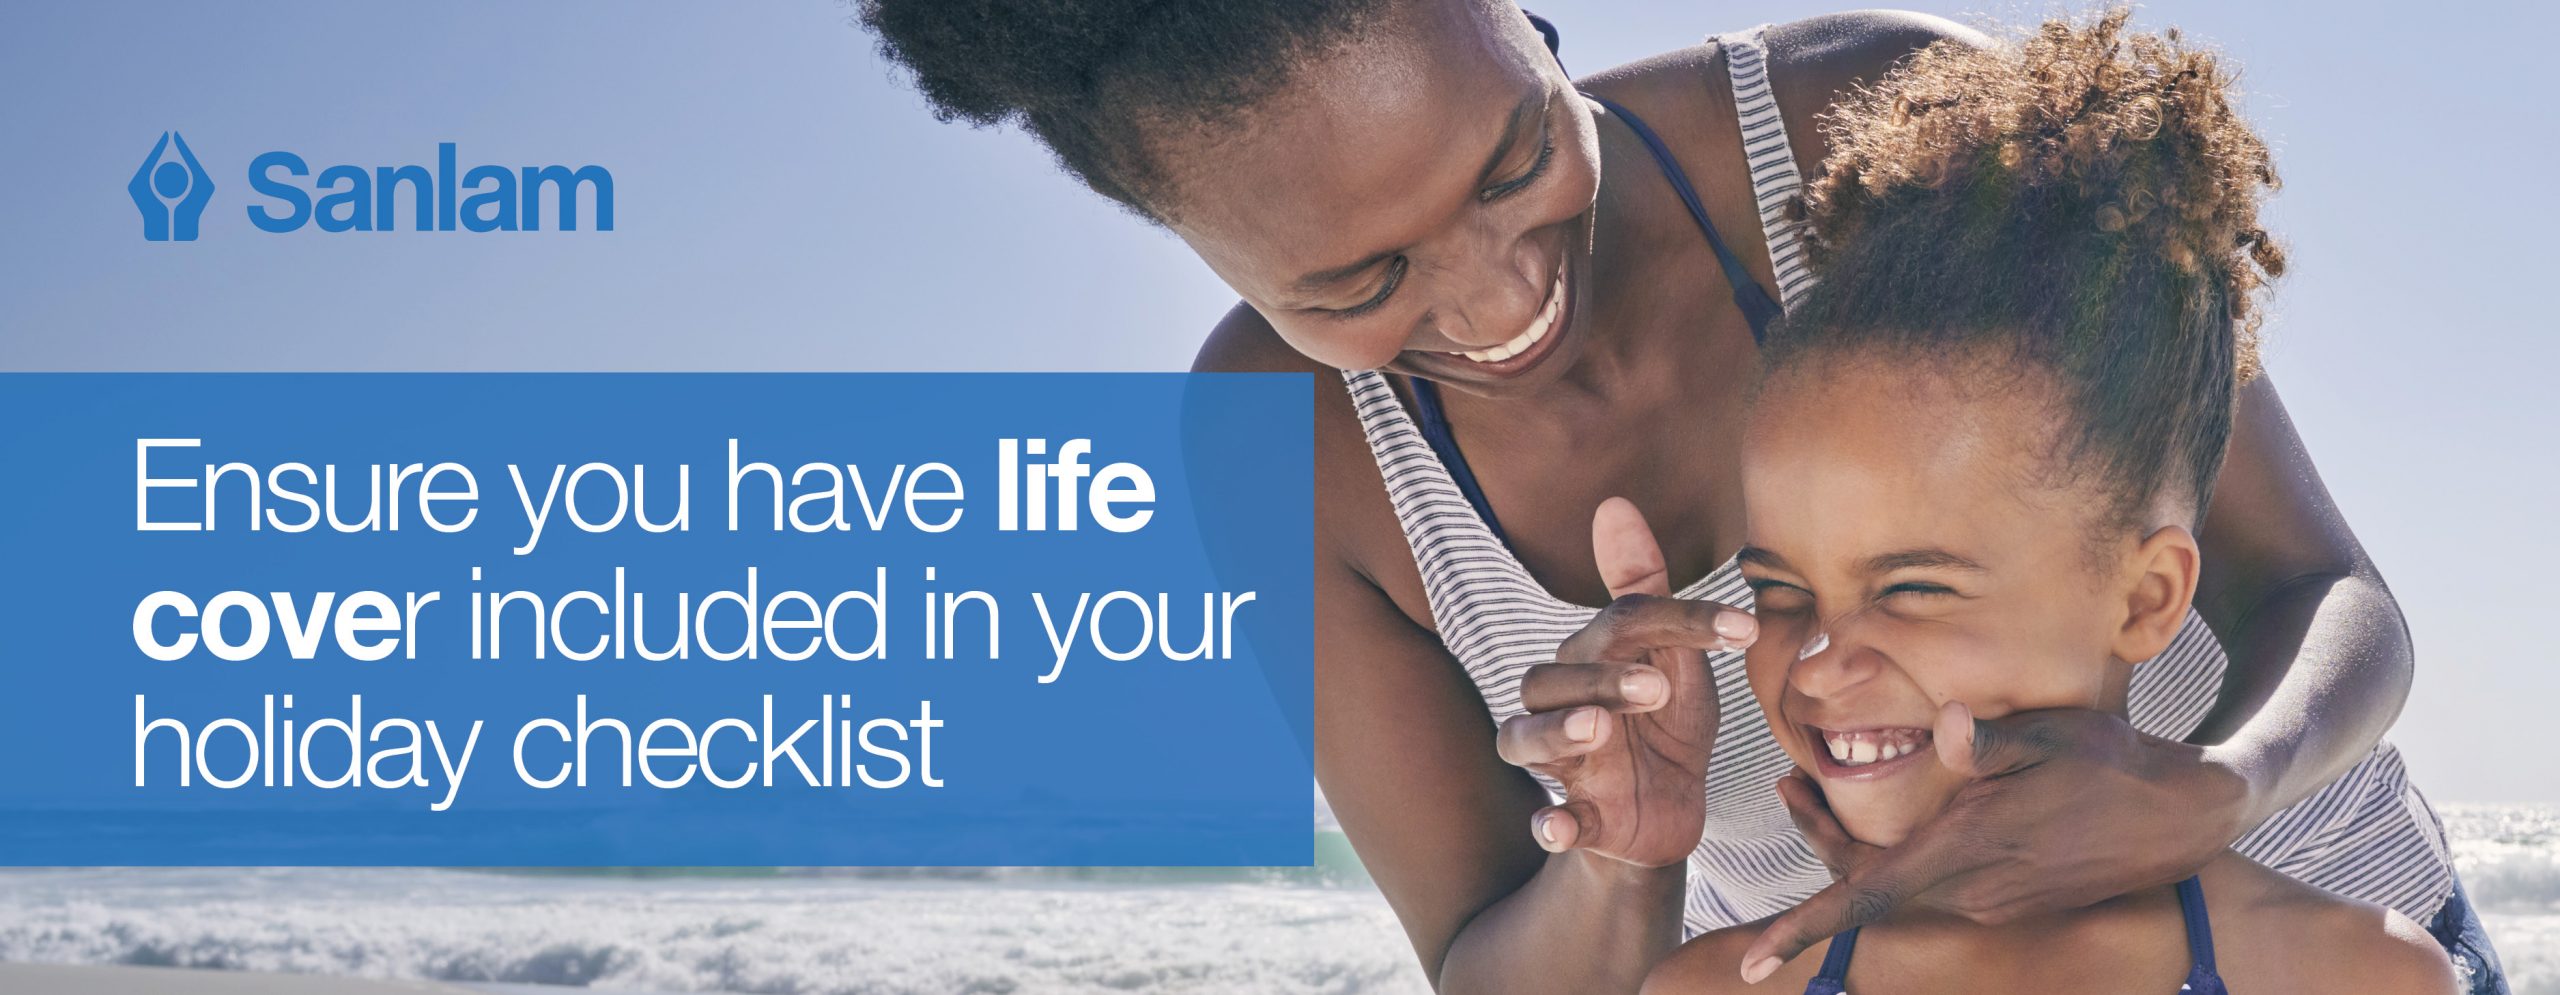 Ensure you have life cover included in your holiday checklist